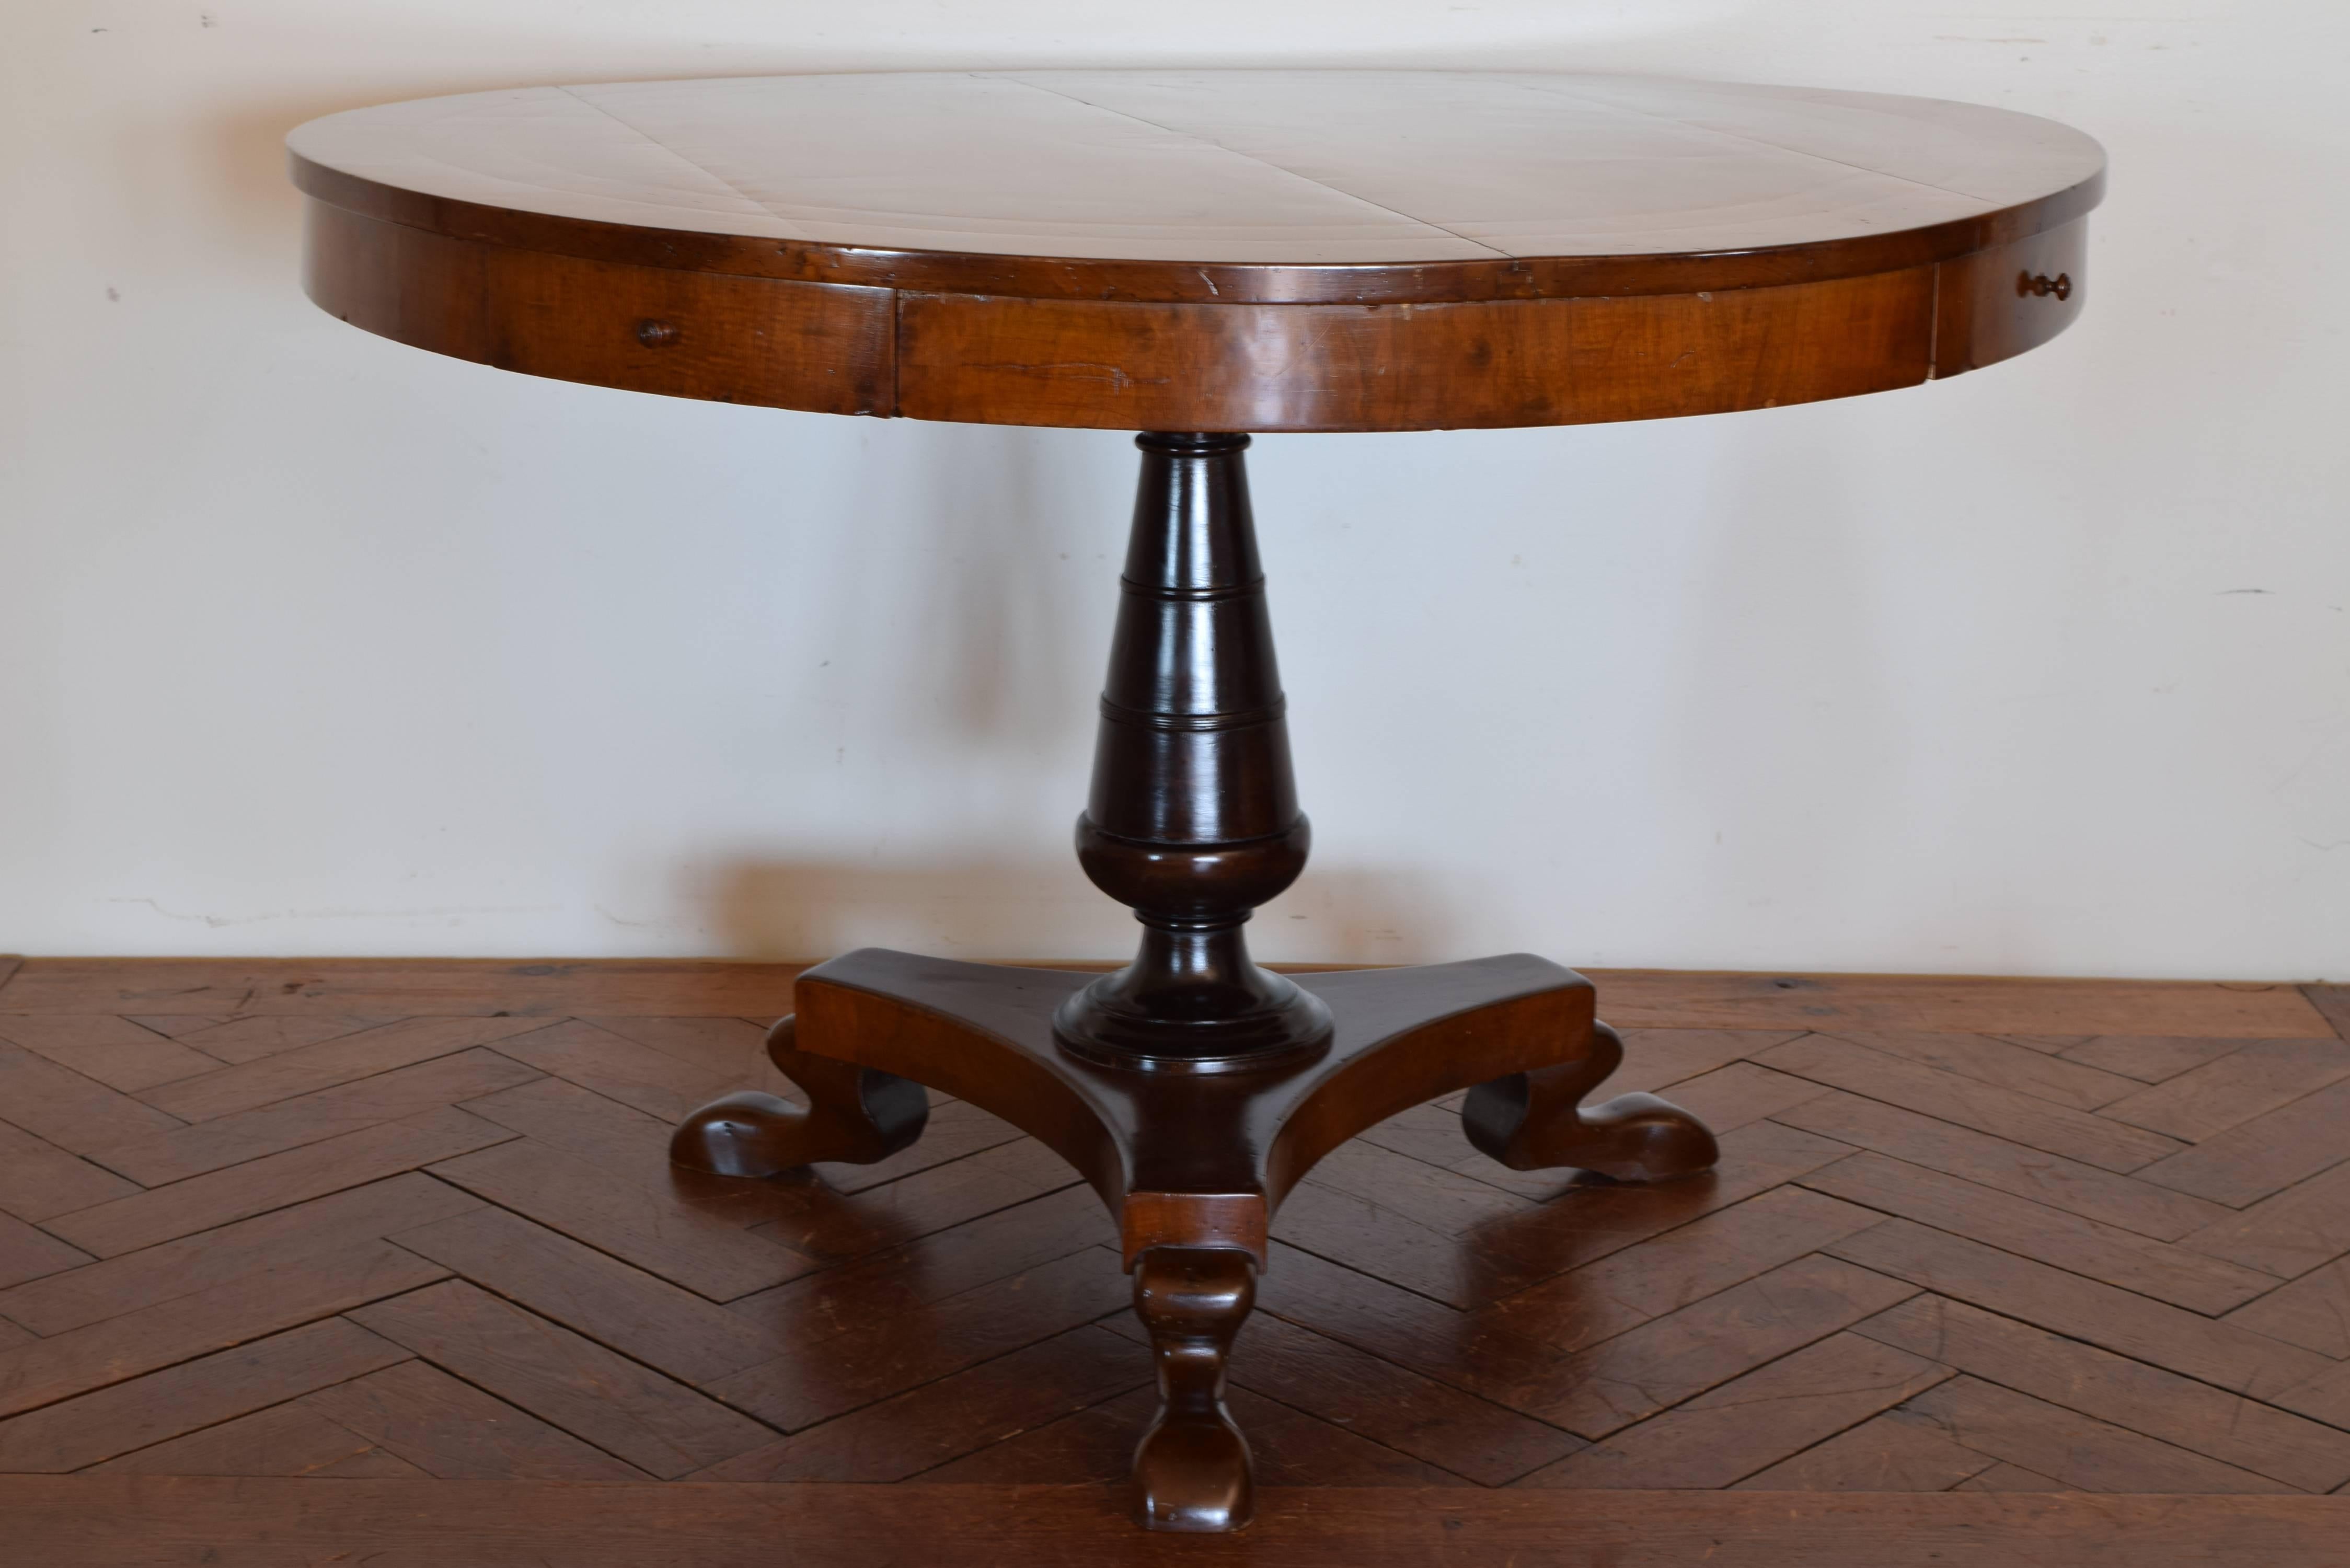 Italian late neoclassic walnut and ebonized four-drawer center table, circa 1830-1840. The round top having band inlays and a centered inlaid star medallion and housing four drawers, the tapering standard is ebonized and resting atop a tripartite